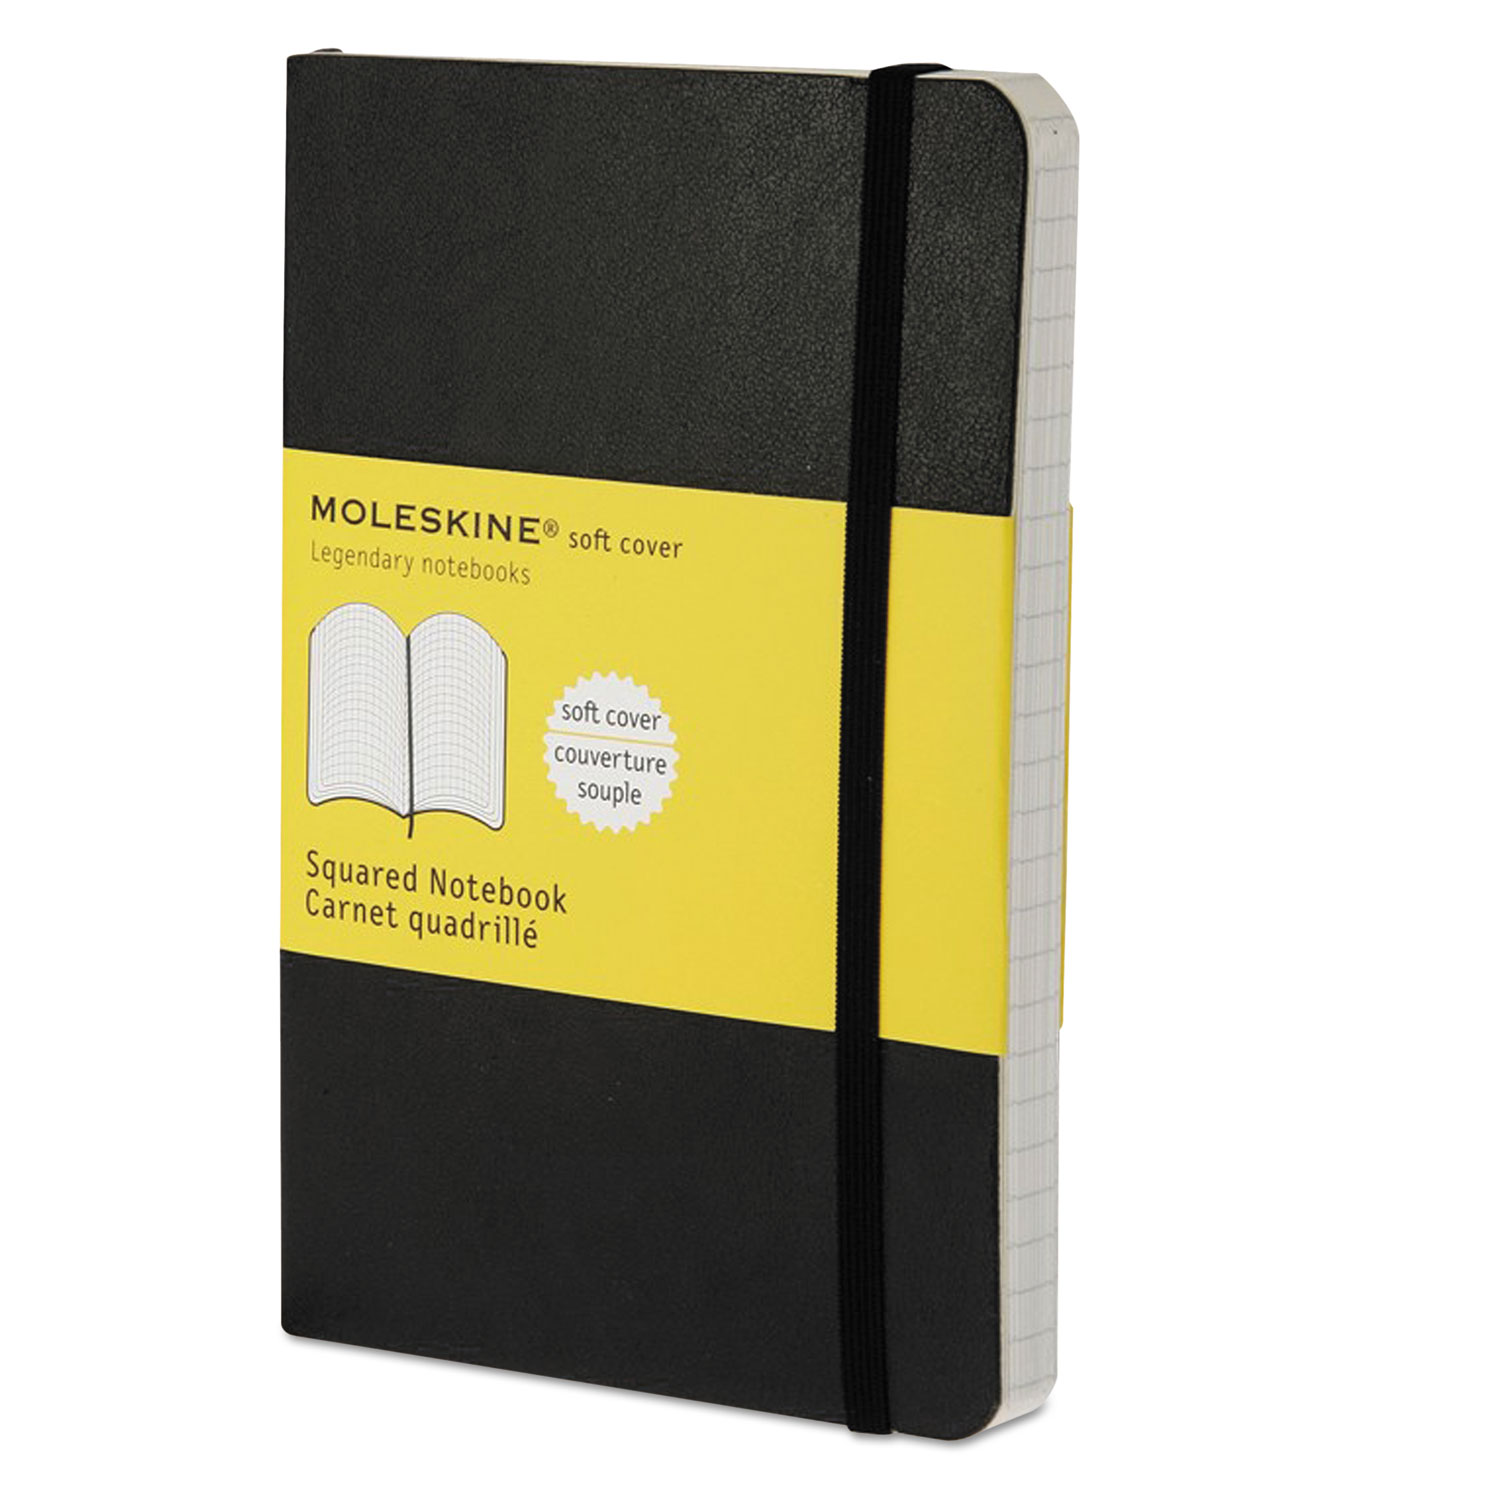  Moleskine 9788883707124 Classic Softcover Notebook, 4 sq/in Quadrille Rule, Black Cover, 5.5 x 3.5, 192 Sheets (HBGMS712) 